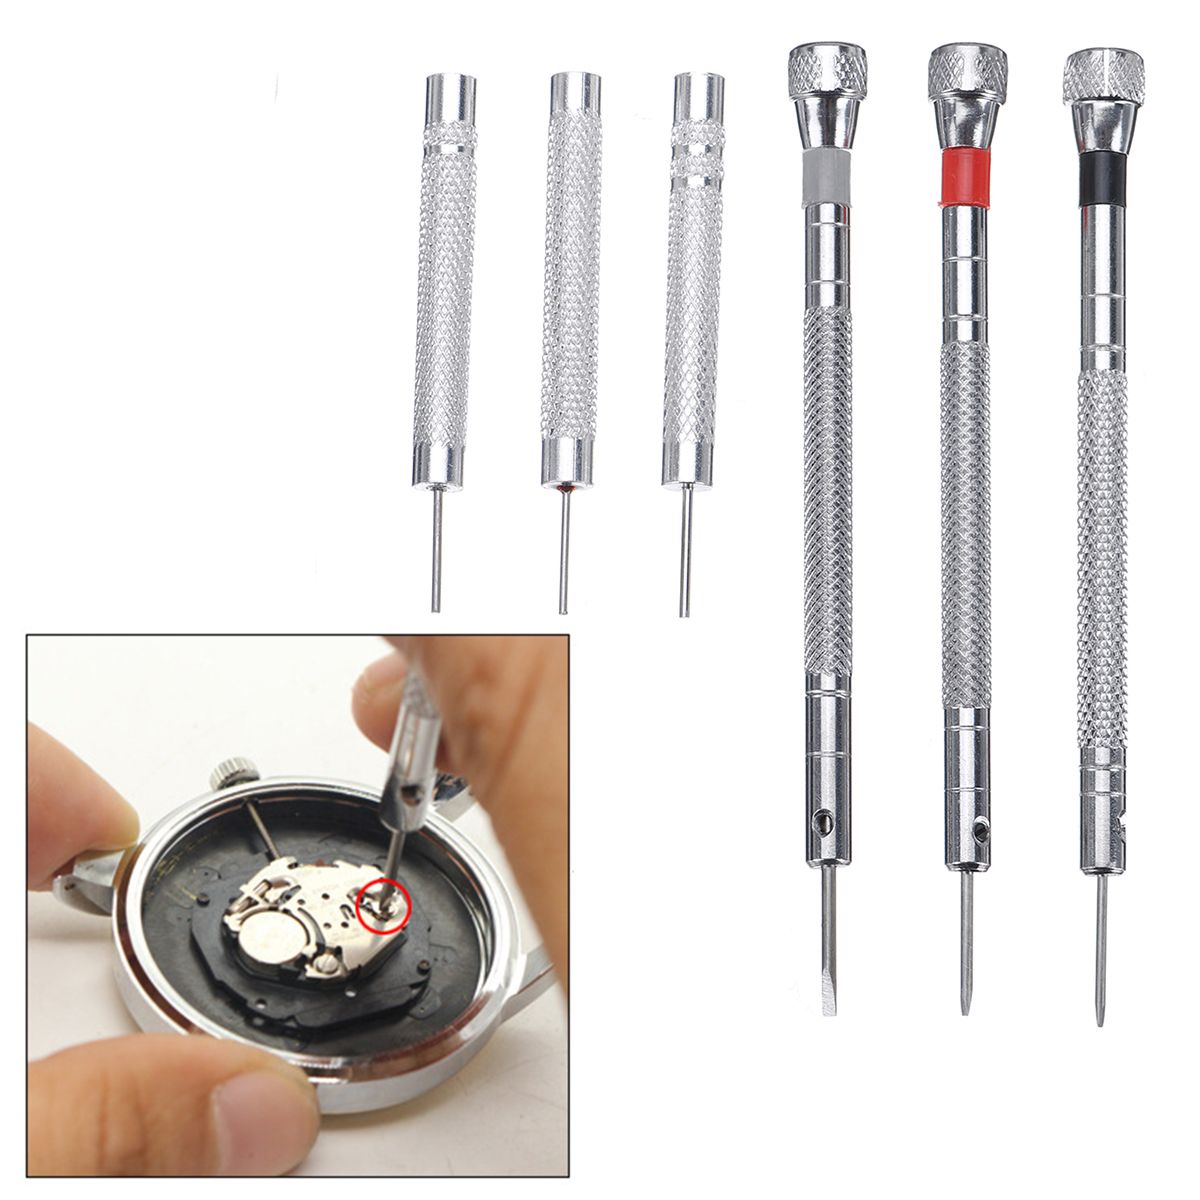 147Pcs-Watch-Repair-Tools-Kit-Watchmaker-Back-Case-Opener-Spring-Pin-Bars-Remover-1627897